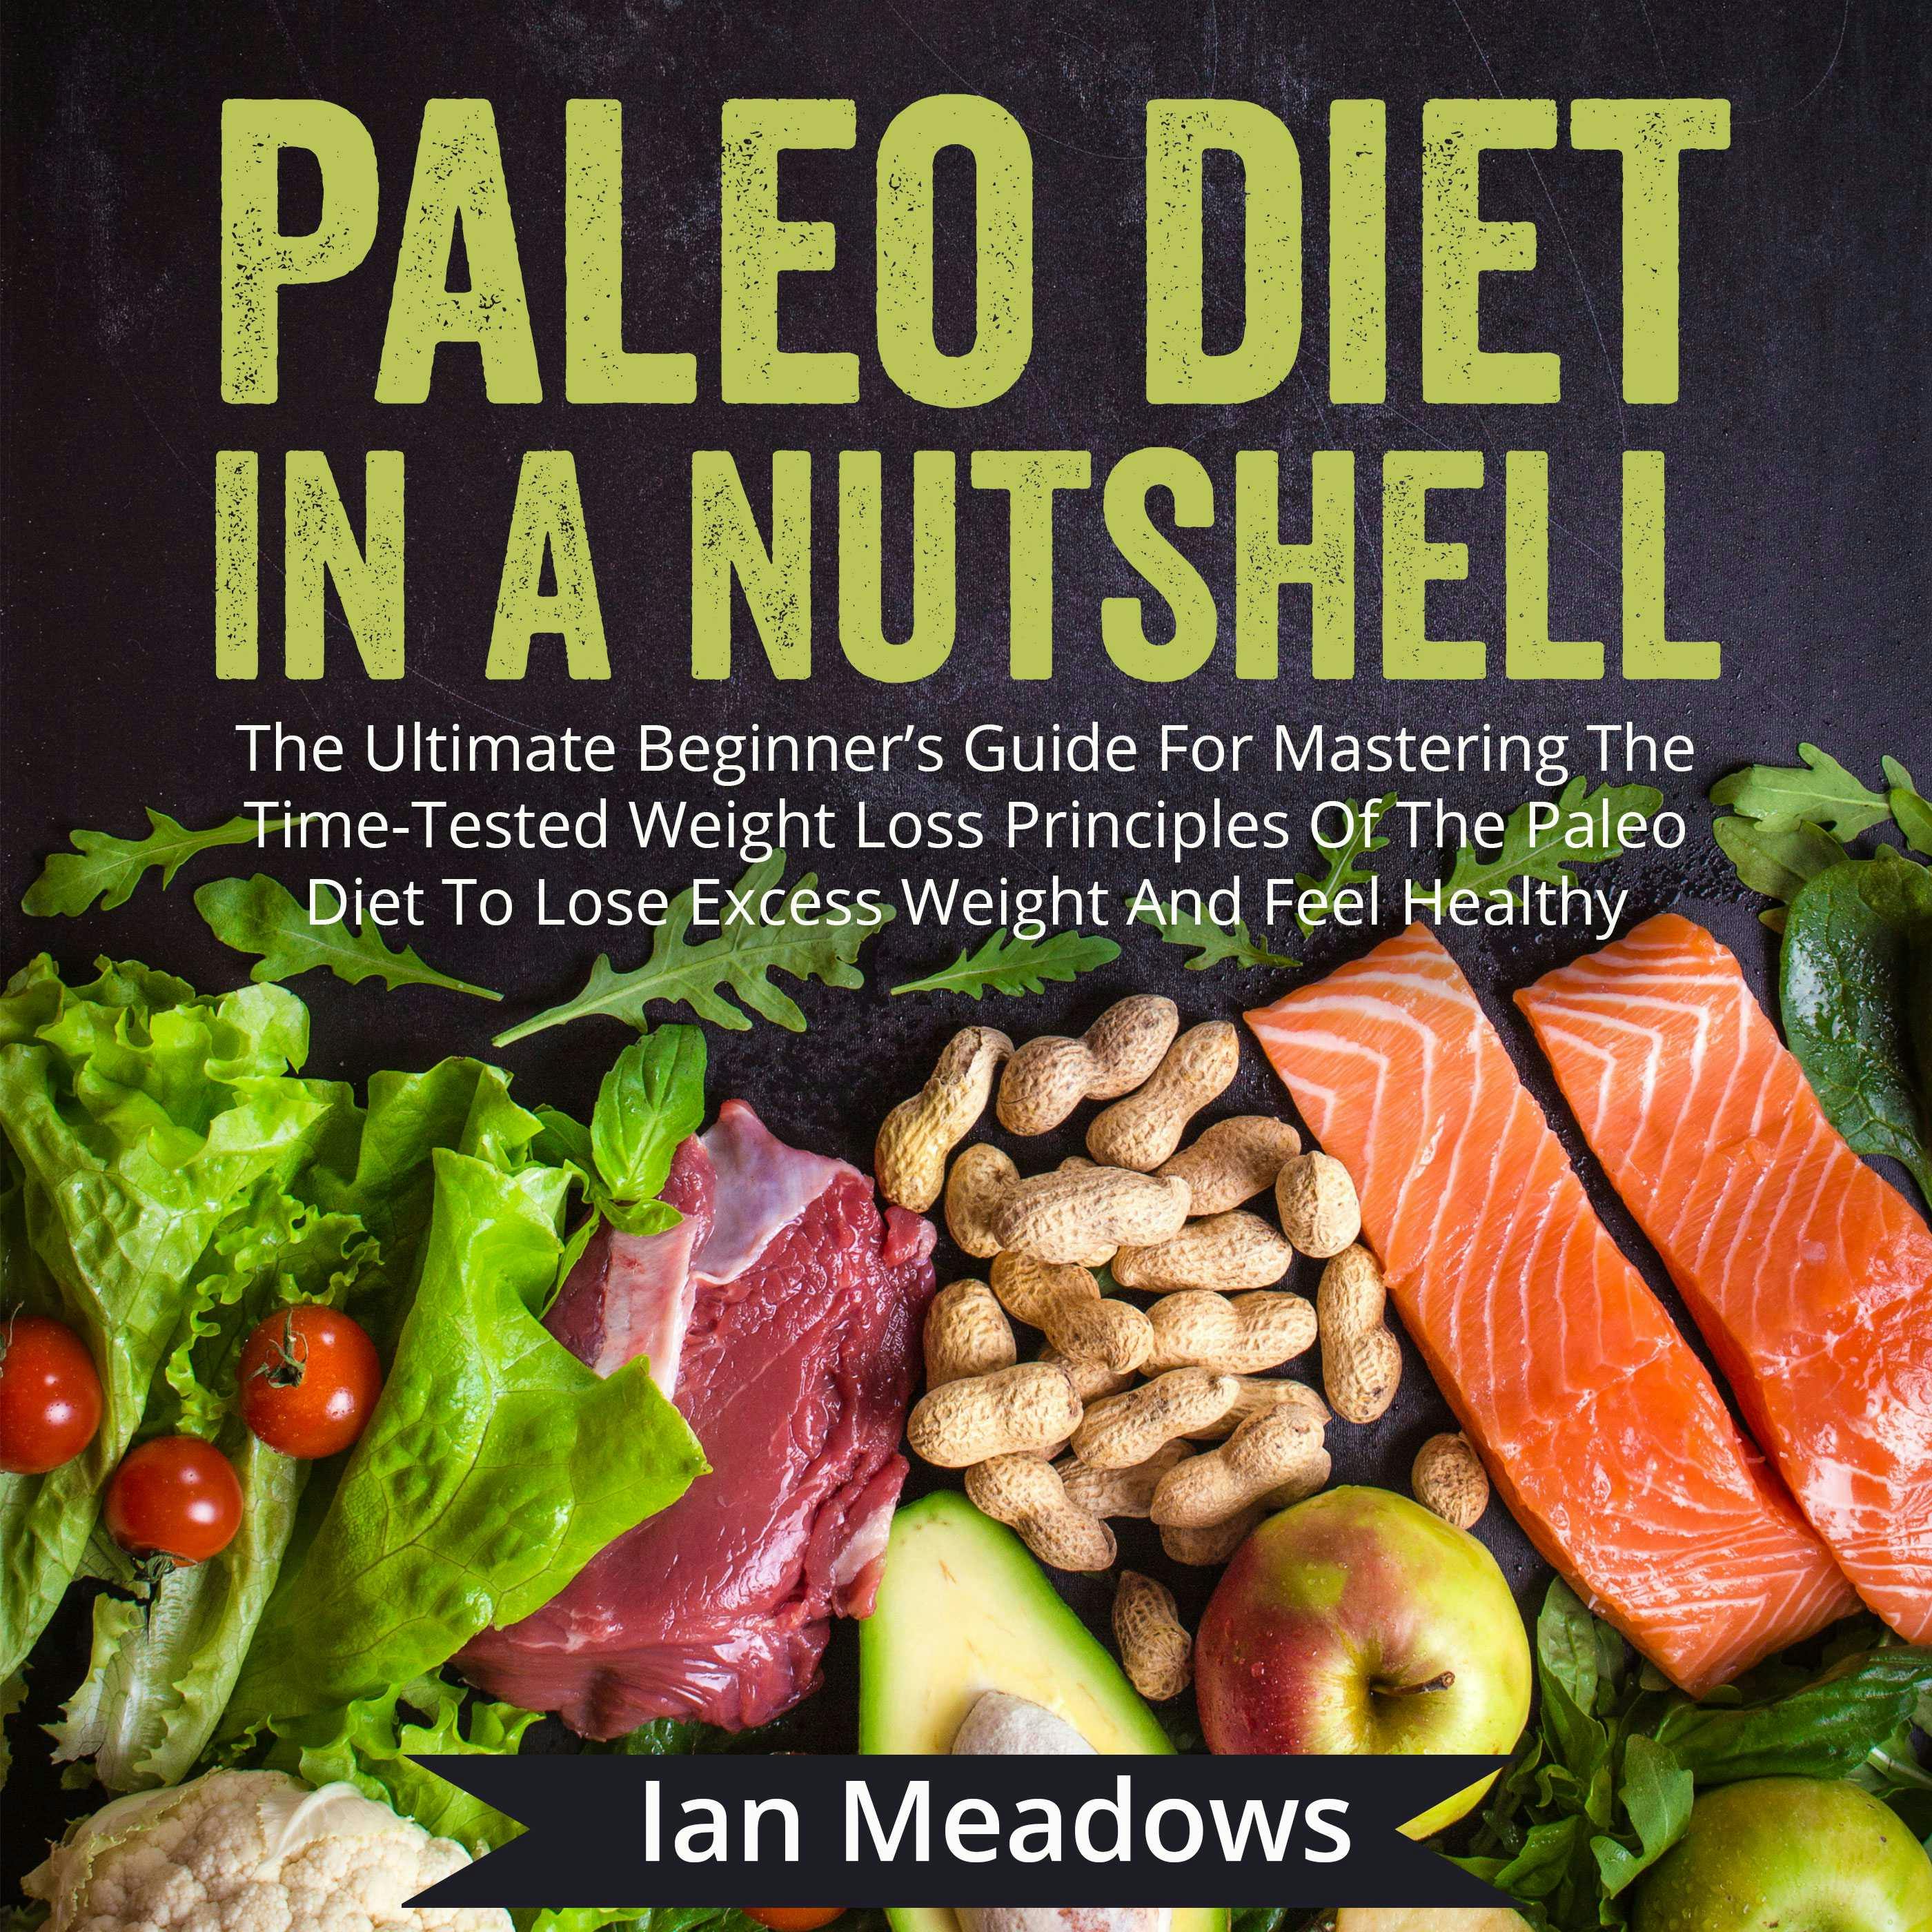 Paleo Diet In A Nutshell: The Ultimate Beginner's Guide For Mastering The Time-Tested Weight Loss Principles Of The Paleo Diet To Lose Excess Weight And Feel Healthy - undefined